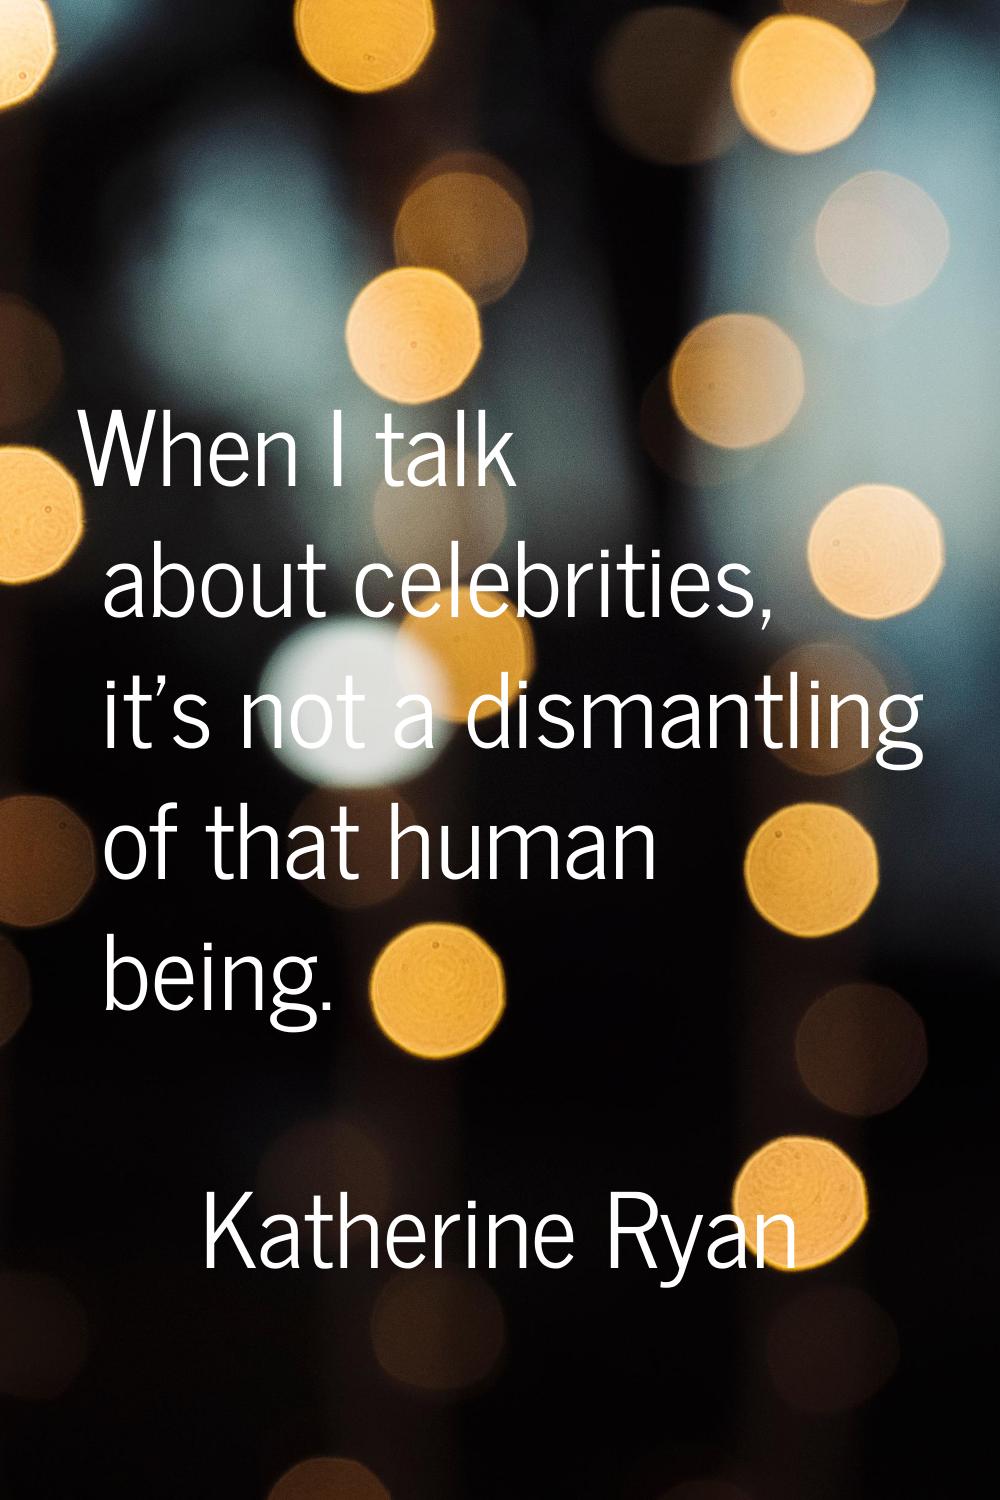 When I talk about celebrities, it's not a dismantling of that human being.